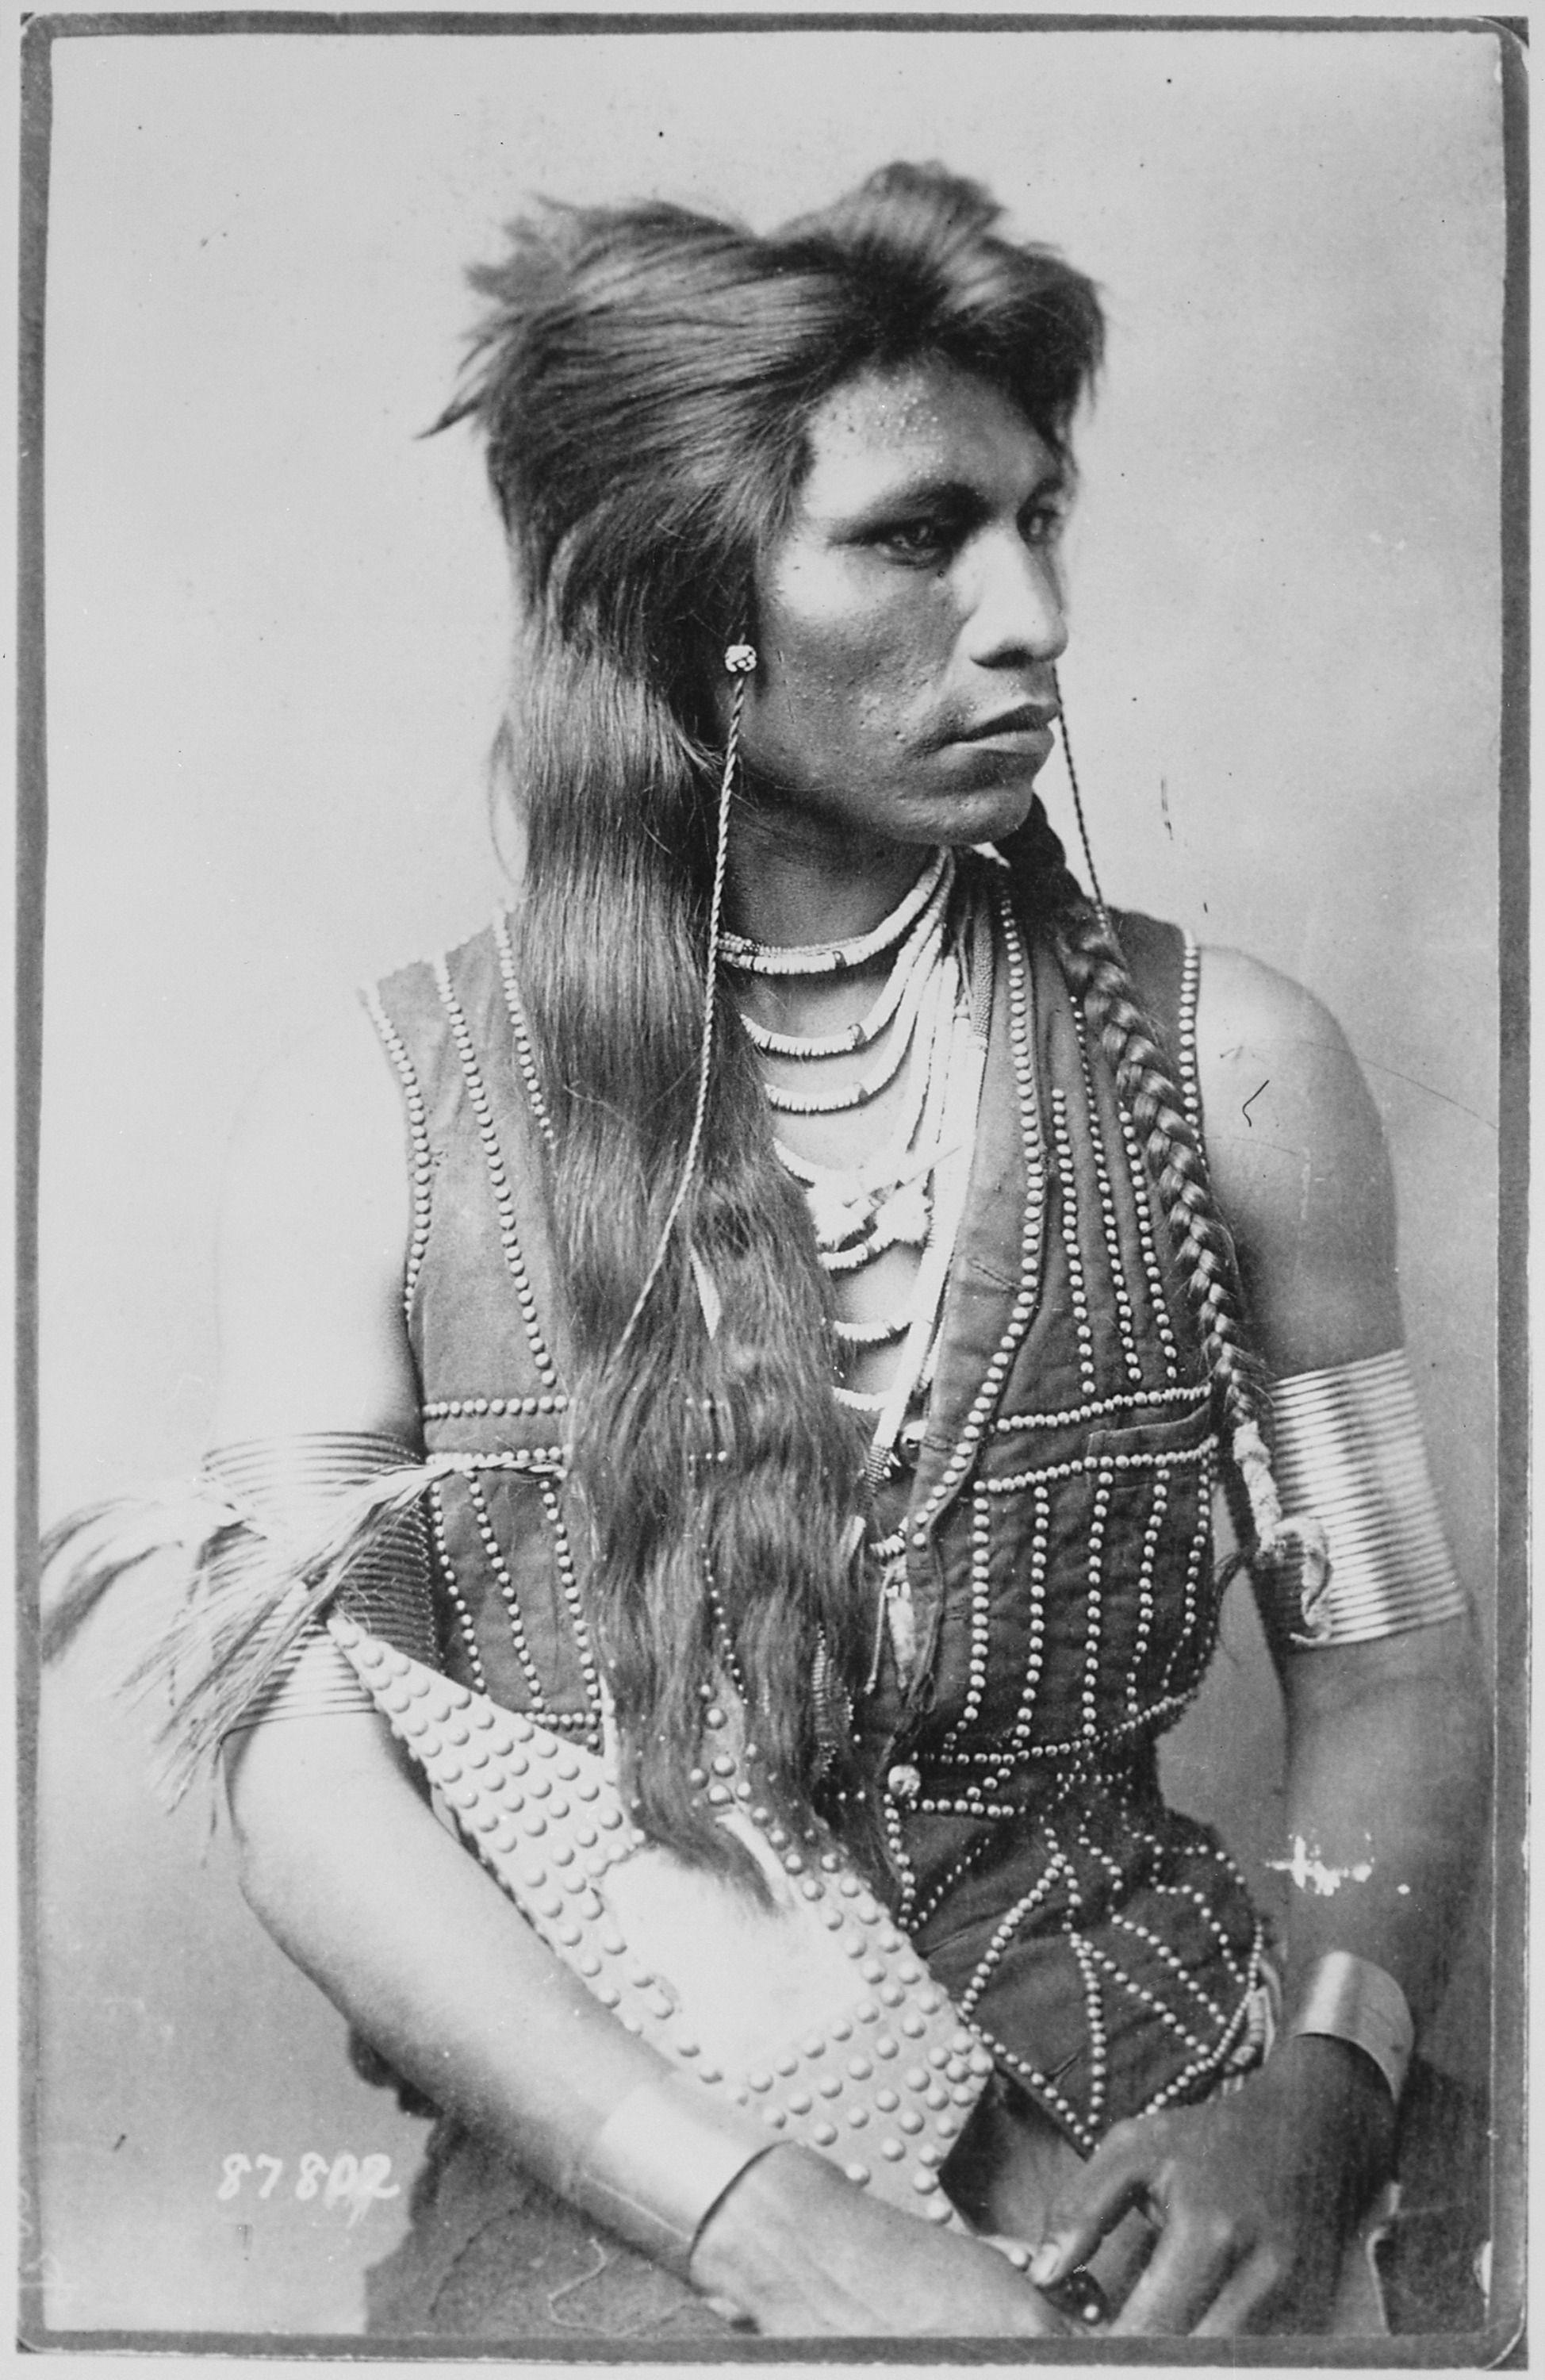 Rabbit Tail, a member of the Shoshone tribe who worked as a US Army scout, ca. 1895.jpg